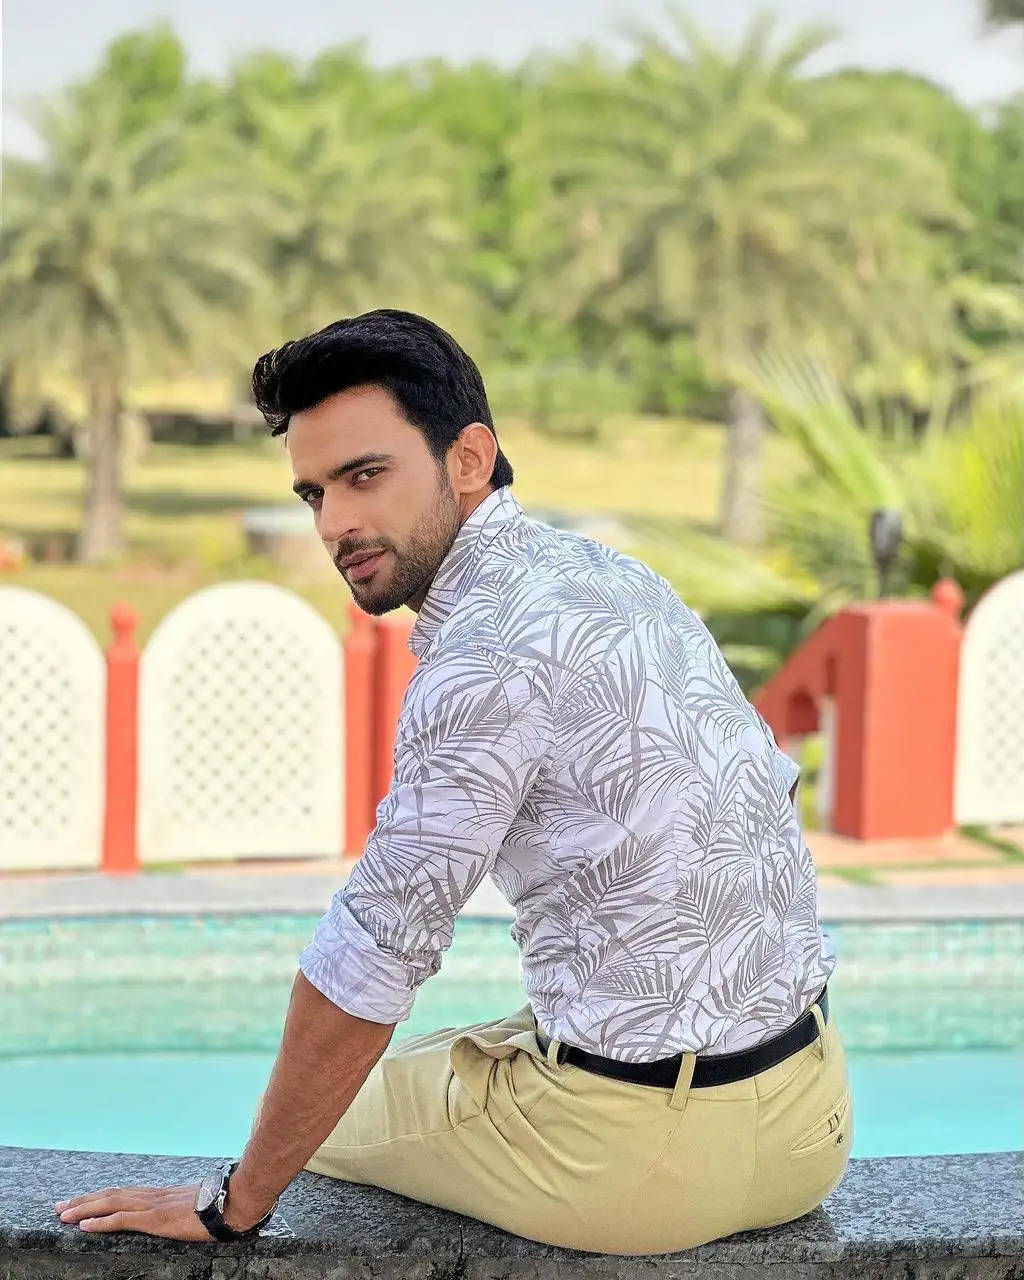 Rohit Choudhary on His New Show 'Dalchini': I Am Eternally Grateful to Ravie and Sargun for Giving Me This Opportunity.